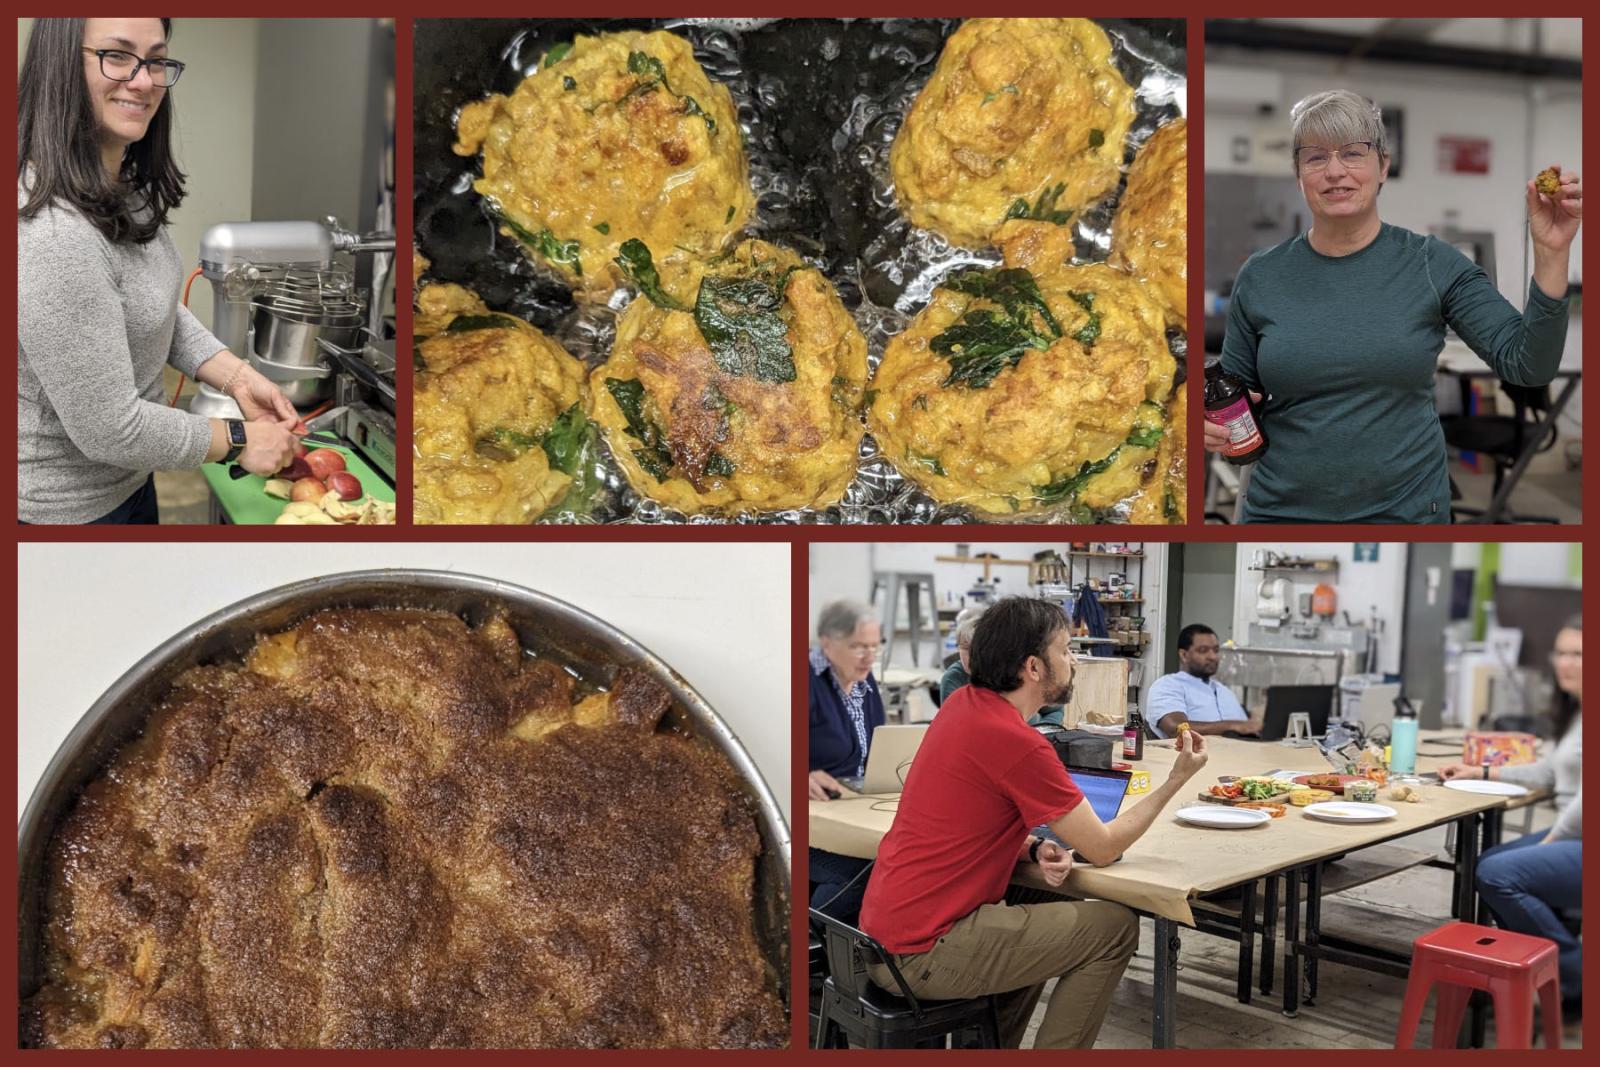  The collage displays a group meal in a community kitchen setting, with images of people preparing and enjoying food together, including shots of vegetable fritters being fried and a baked cinnamon dessert. The environment suggests a warm, communal gathering in a makerspace.